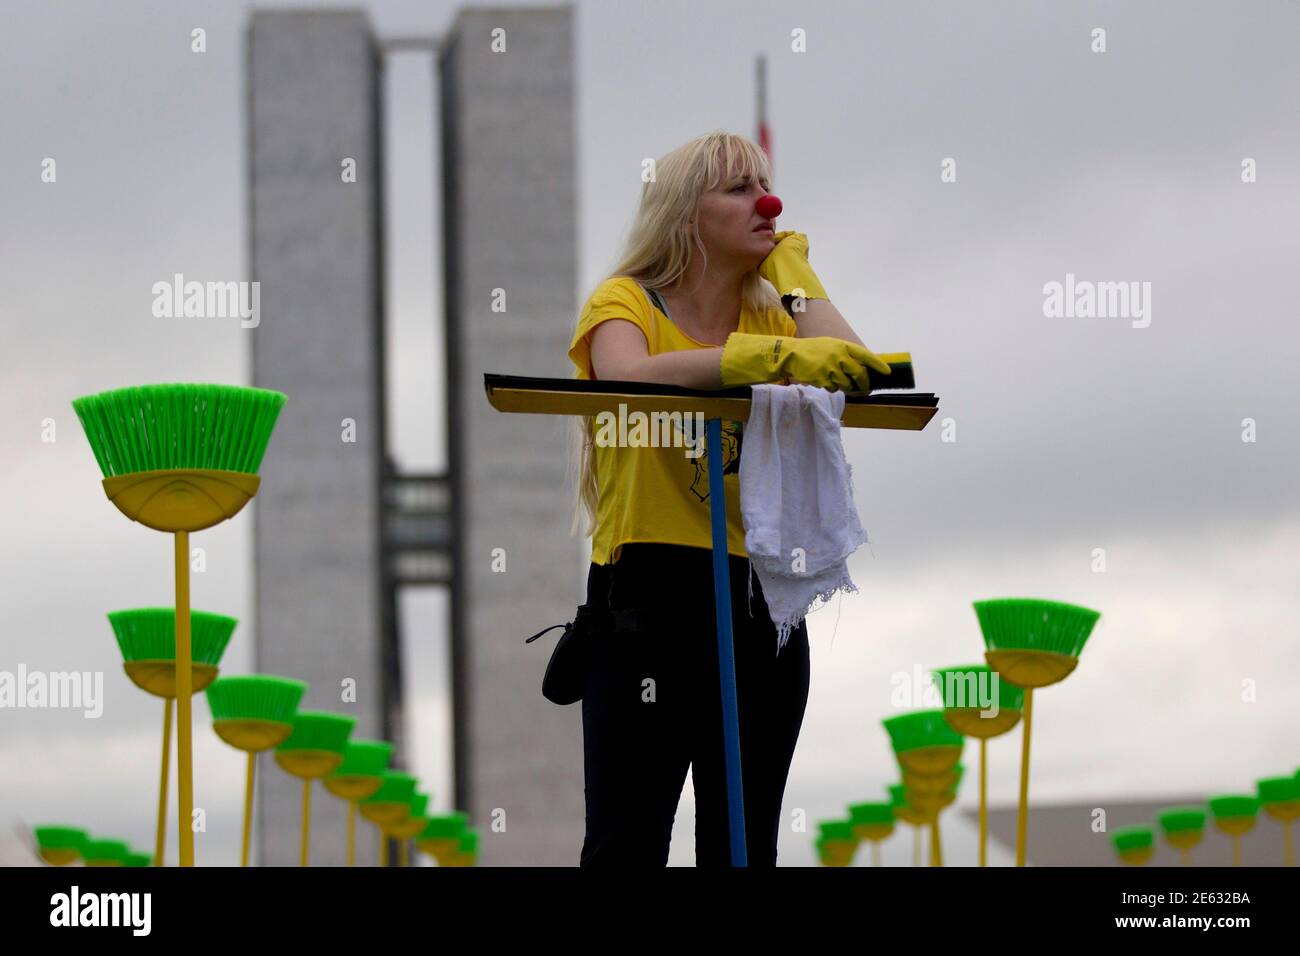 Cristia Lima, a public servant and a volunteer at the Rio de Paz (Peace Rio) Non-Governmental Organization (NGO), participates in a protest where brooms and household cleaning equipment are placed by Rio de Paz on the lawn in front of the National Congress in Brasilia January 30, 2013. The 81 cleaning kits, which represent the number of senators in the country, are placed to urge compliance with the Law of Clean Record for the election of the new President of the Brazilian Senate. REUTERS/Ueslei Marcelino (BRAZIL - Tags: POLITICS CIVIL UNREST) Stock Photo